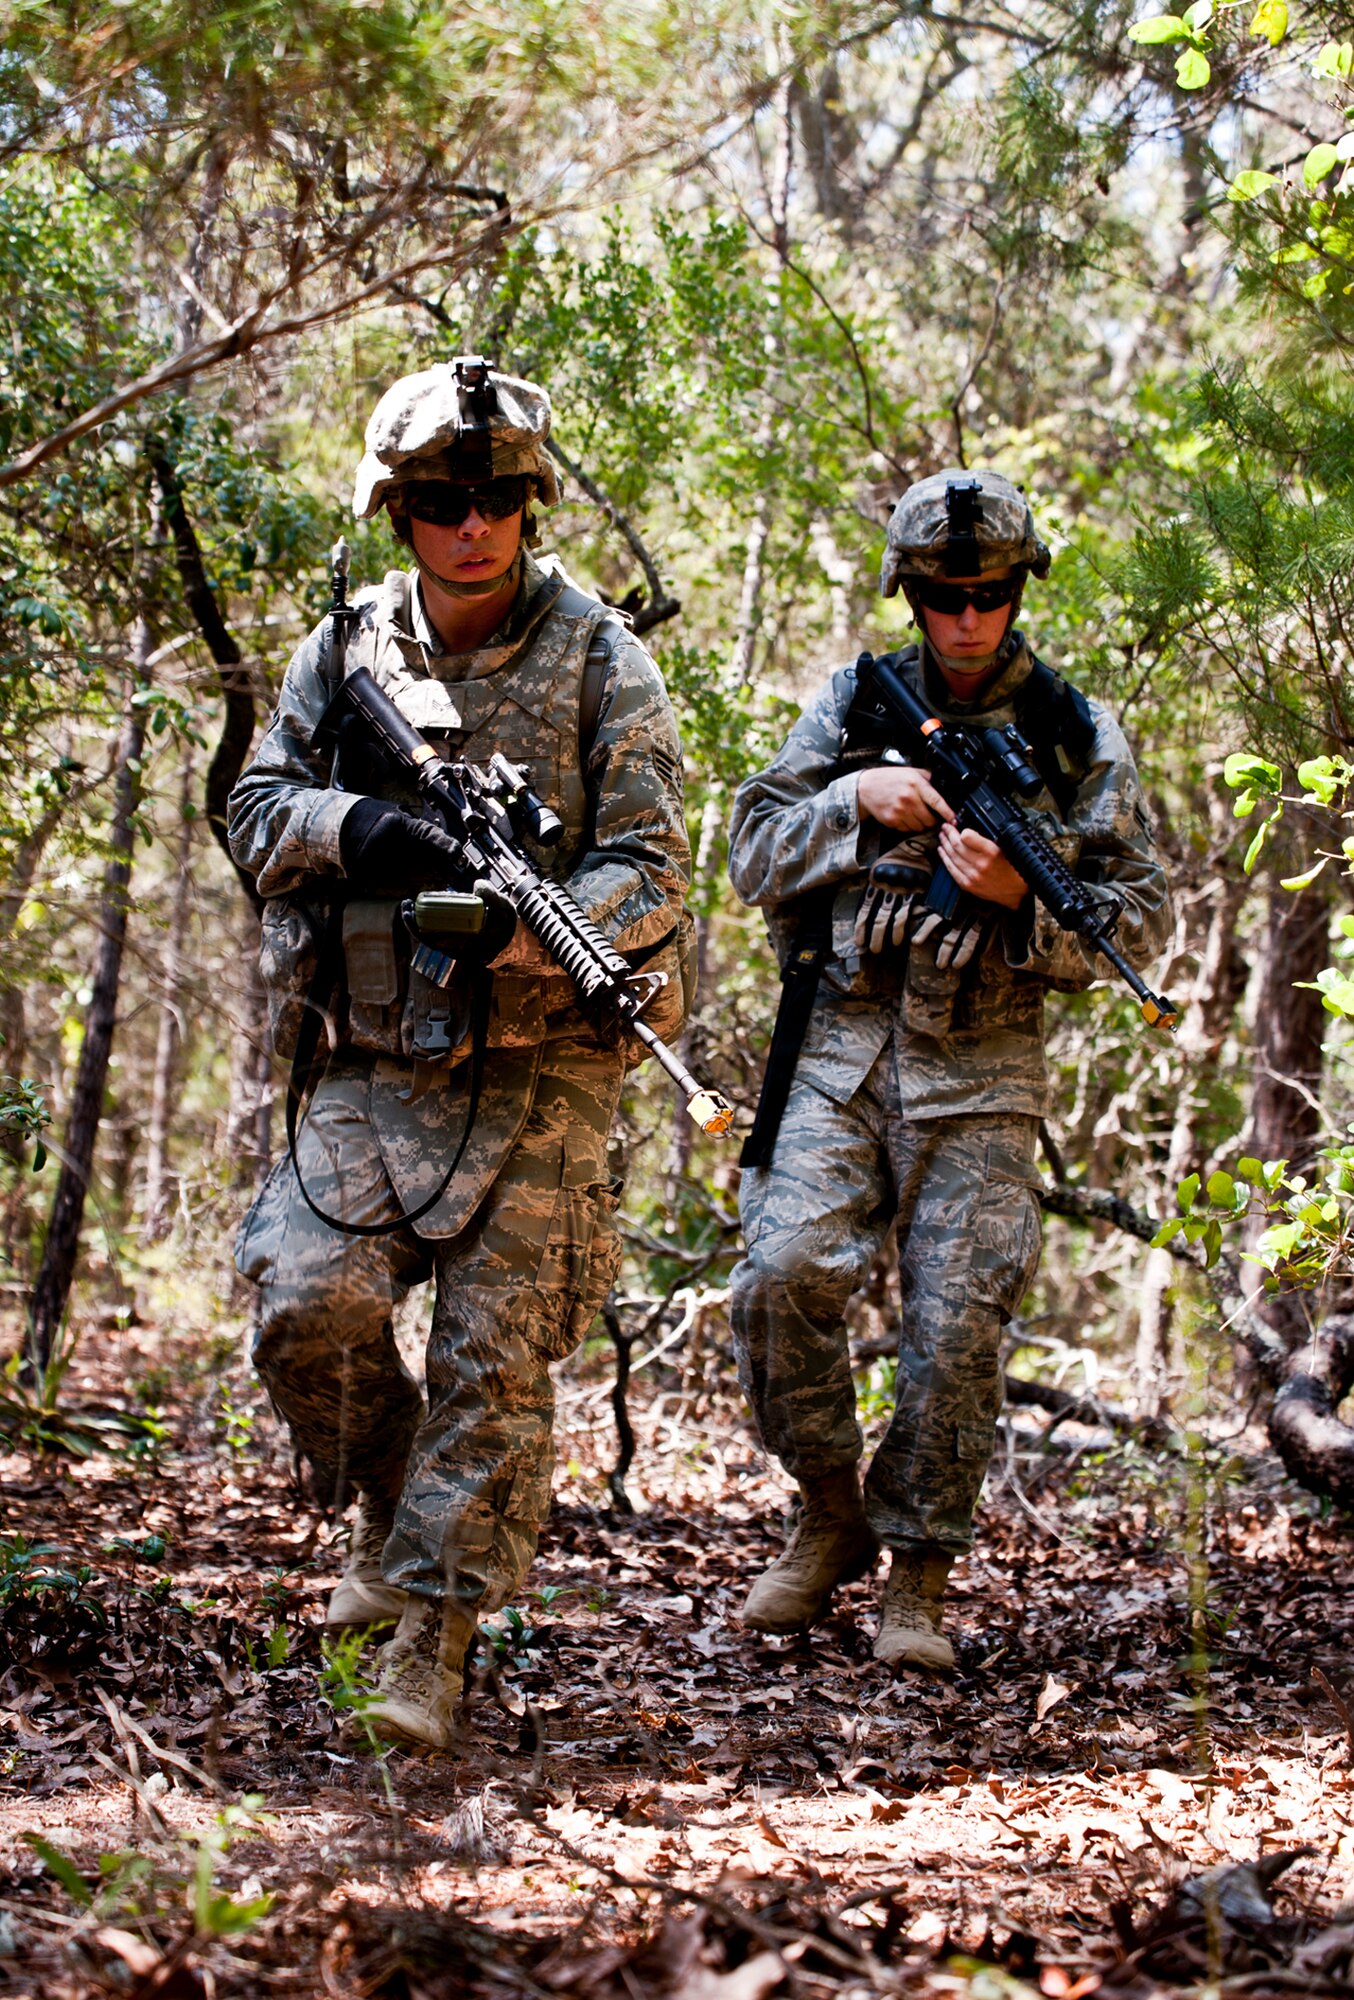 Senior Airman Devin Tiger, 72nd Security Forces Squadron, and Airman 1st Class Guess, 569th U.S. Forces Police, move as a scouting team through the forest during an ‘outside the wire’ exercise April 28 at Eglin Air Force Base, Fla.  This was part of Air Force Materiel Command’s "Brave Defender" training, which is administered by the 96th Ground Combat Training Squadron.   The goal for their exercise was to use land navigation techniques to find a weapons cache based on the intelligence they were given.  GCTS instructors push 10 training classes a year, which consists of improvised explosive device detection and reaction, operating in an urban environment, mission planning, land navigation and casualty care.   The three-week training culminates with a three-day field training exercise where the Airmen apply what they learned in combat scenarios.  More than 140 Airmen from more than 12 locations attended this training.  (U.S. Air Force photo/Samuel King Jr.)